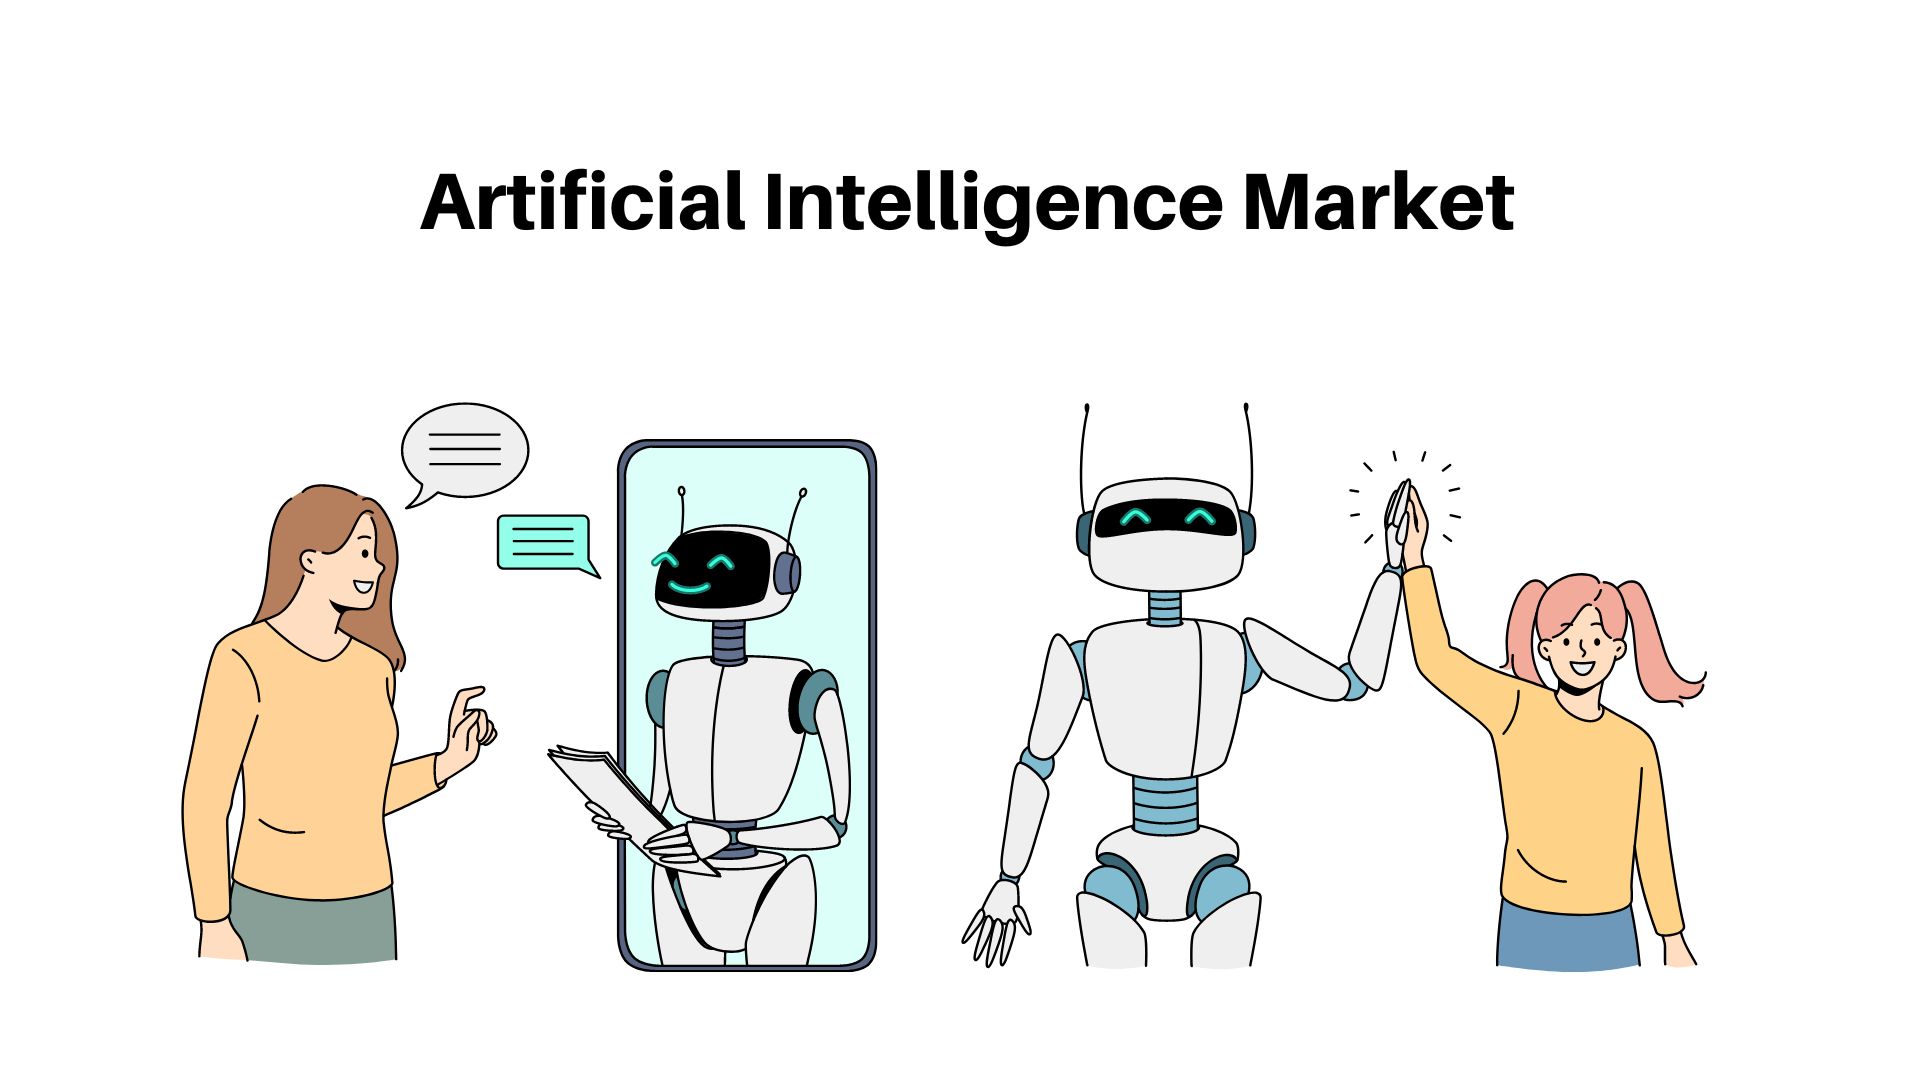 (CAGR of 36.8%) Artificial Intelligence Market Size to Reach USD 2967.51 billion by 2032